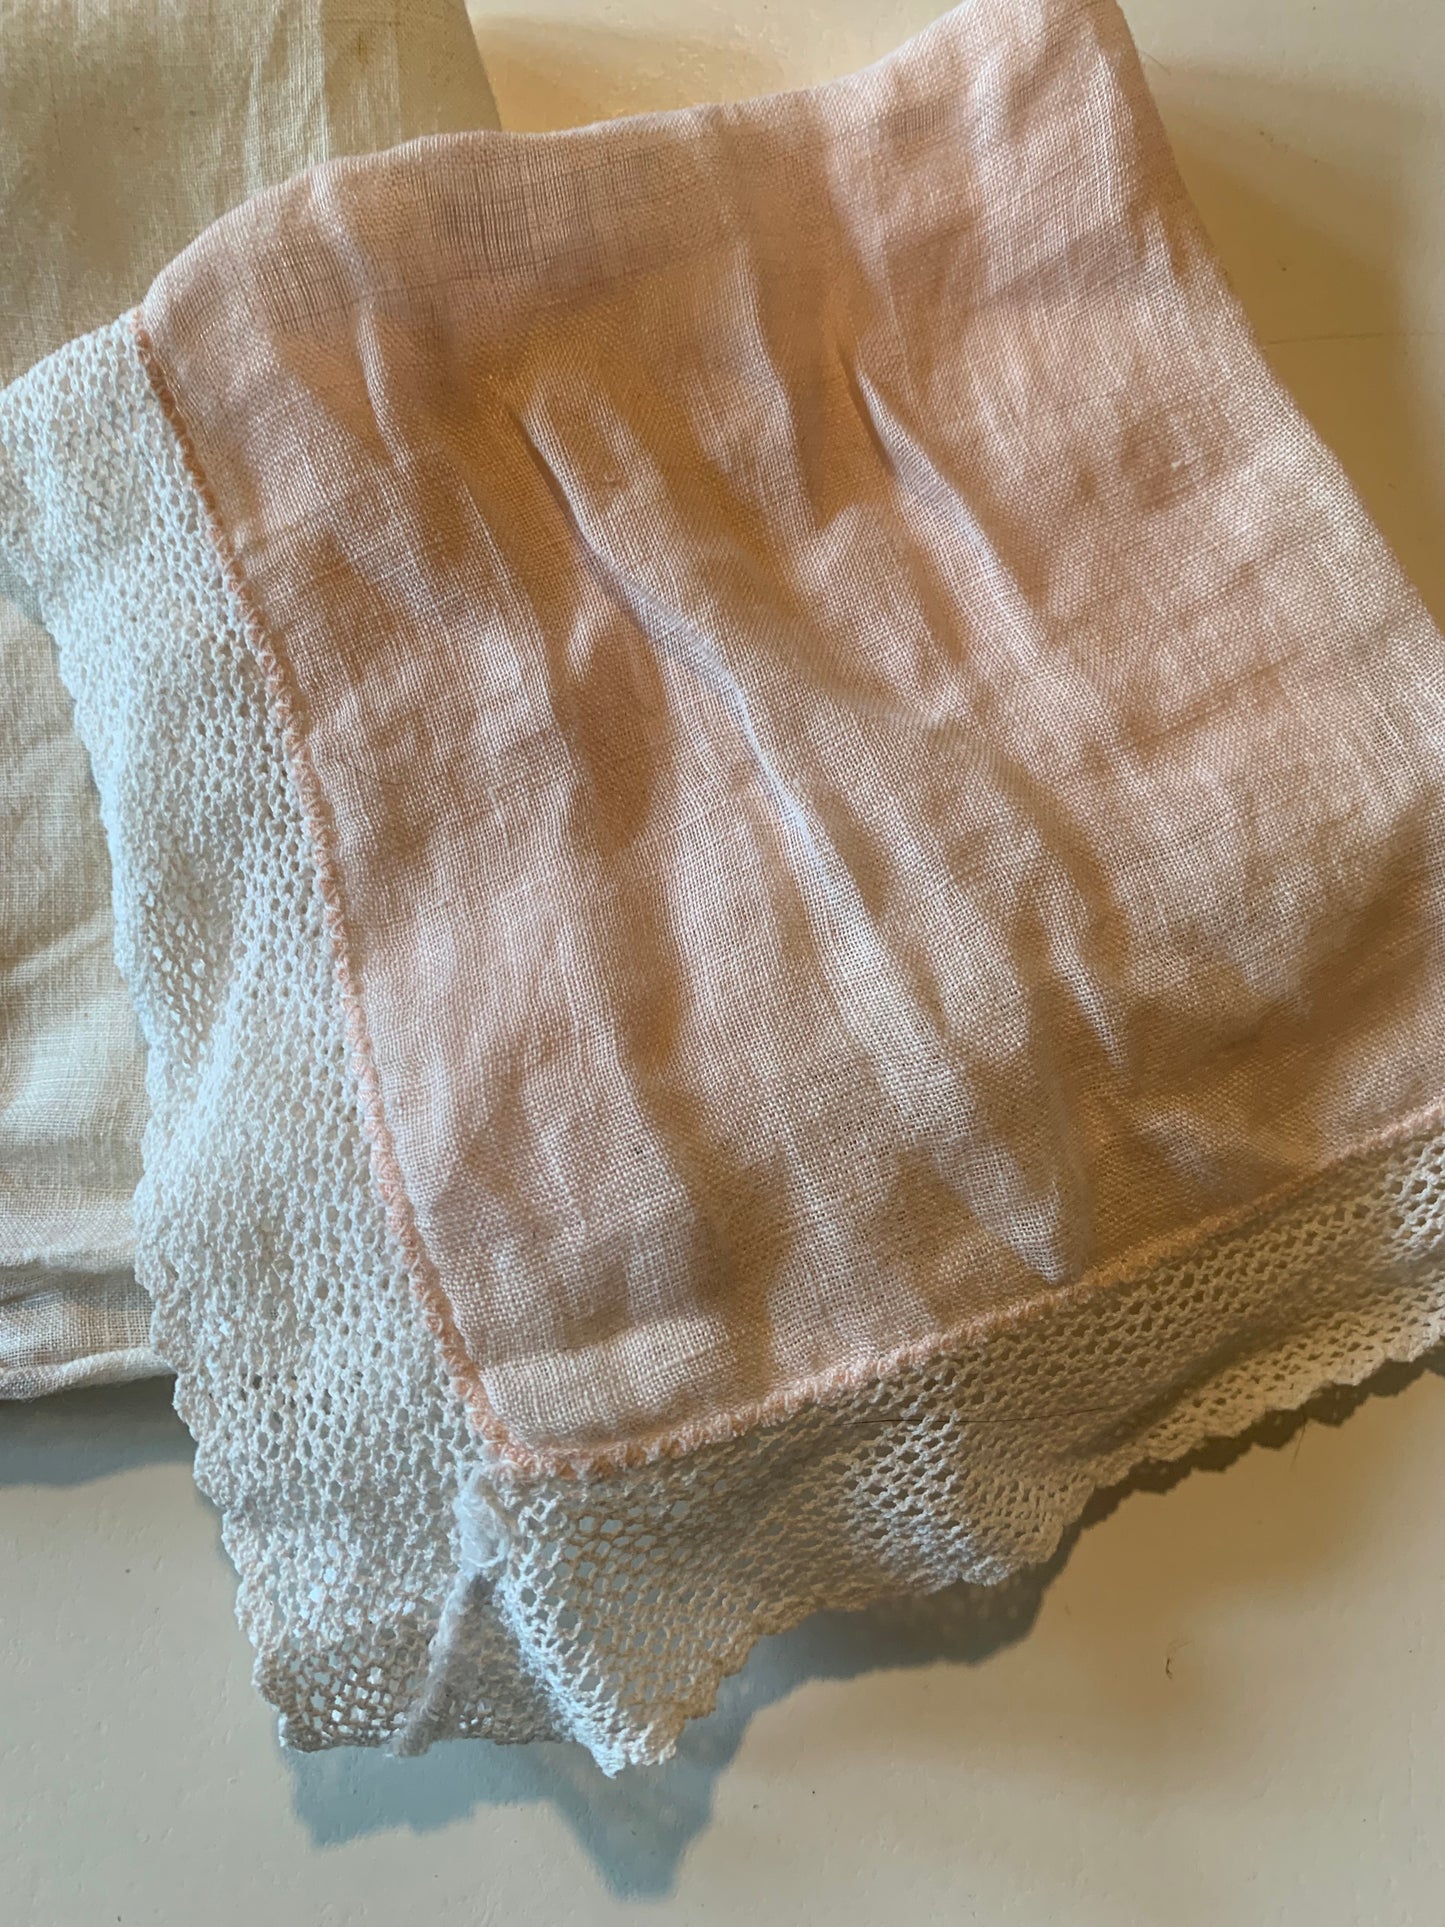 Pink and White Tatted or Embroidered Handkerchiefs Lot 3 circa 1940s